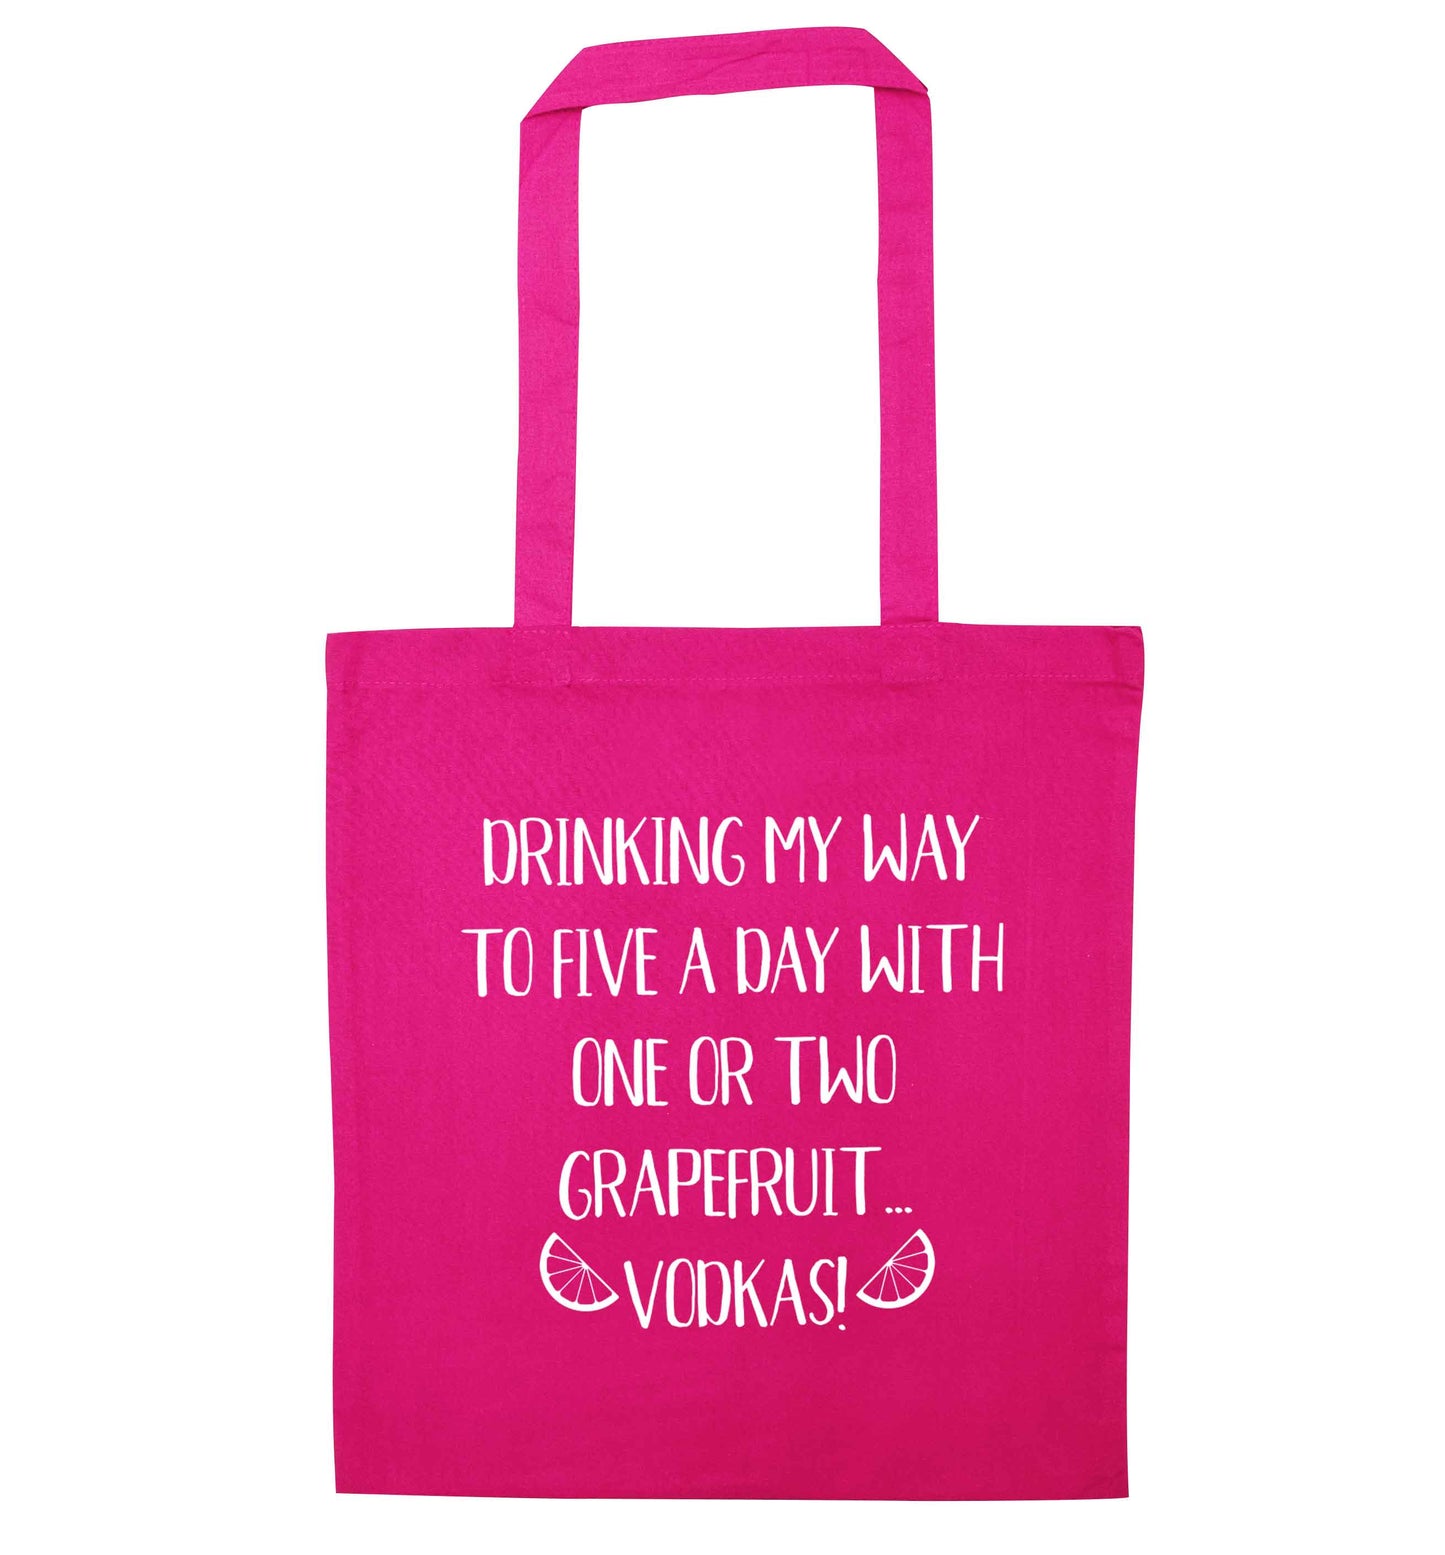 Drinking my way to five a day with one or two grapefruit vodkas pink tote bag